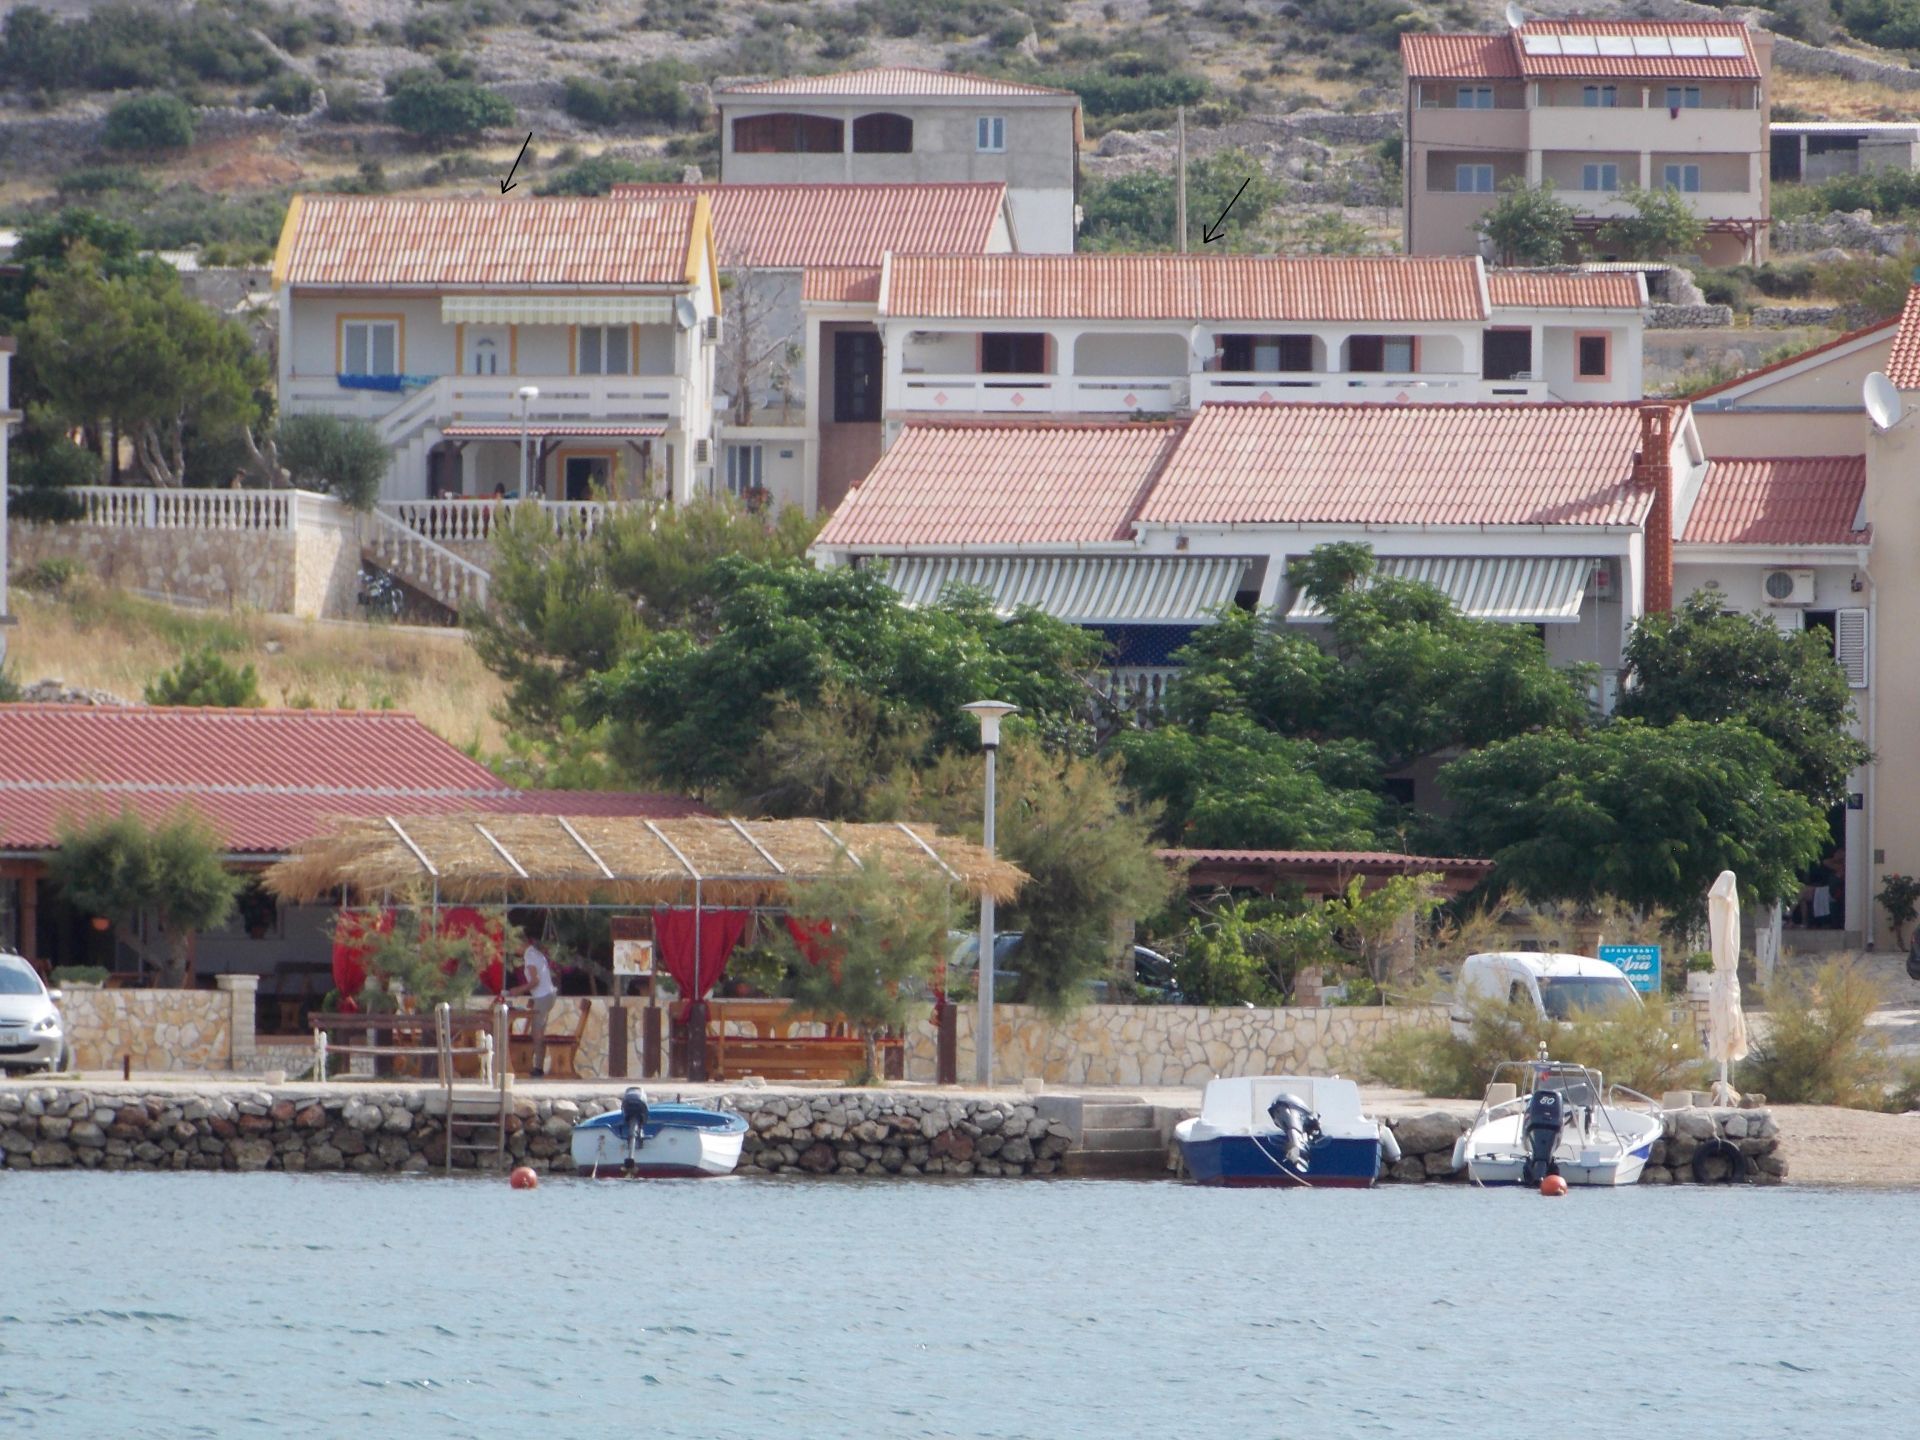 Apartments Kosta - 150 m from beach: A1(3), A3(4+1), A4 Kat (2+1) Kustici - Island Pag 